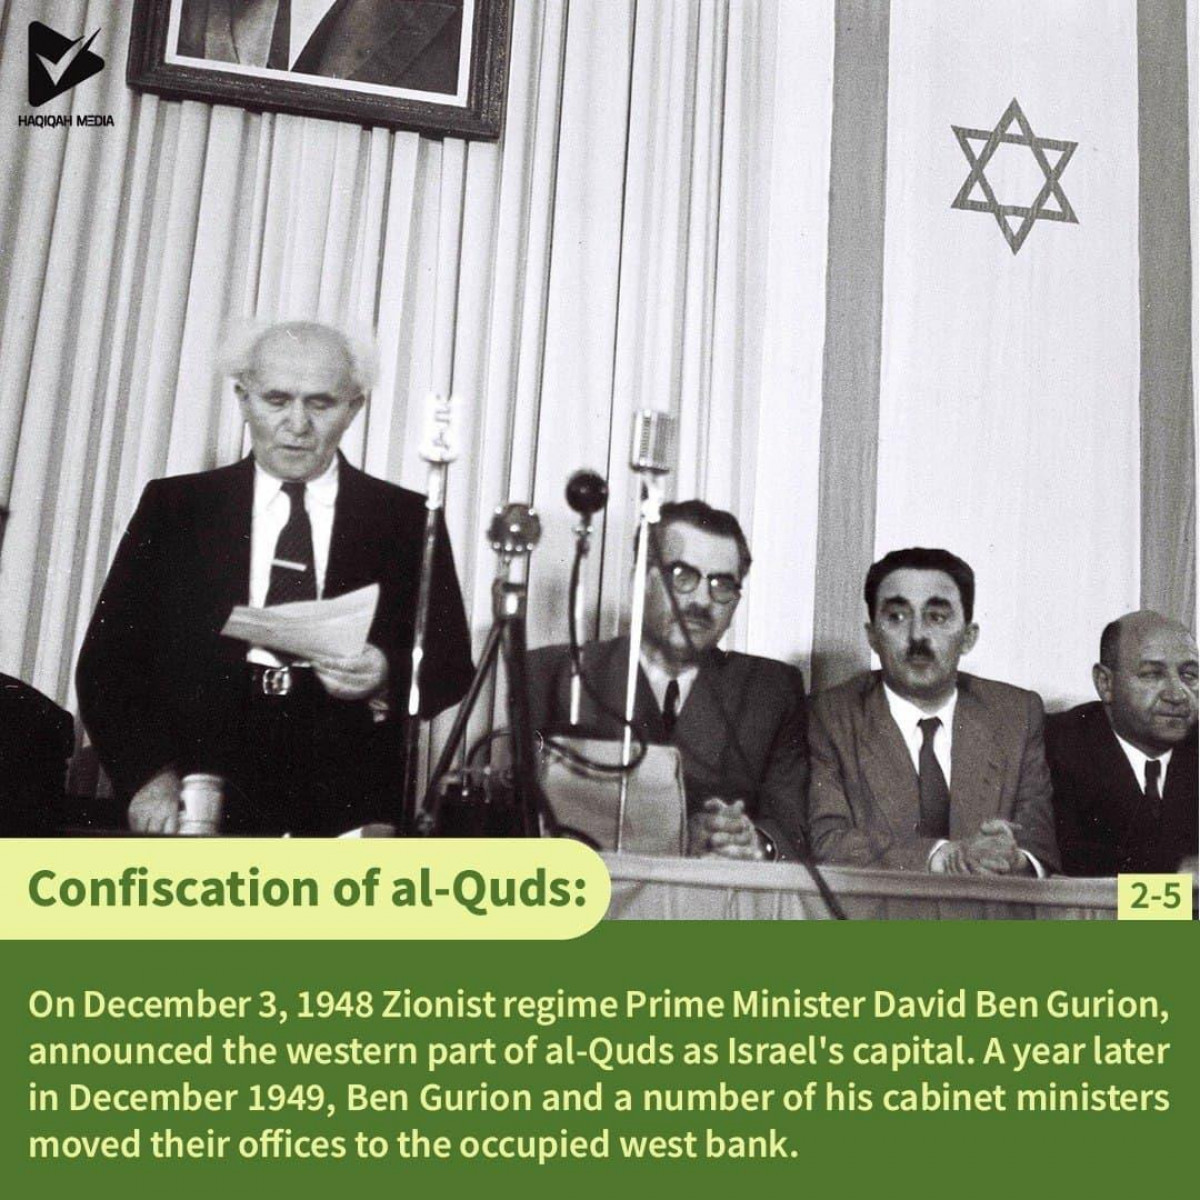 Confiscation of al-Quds 2